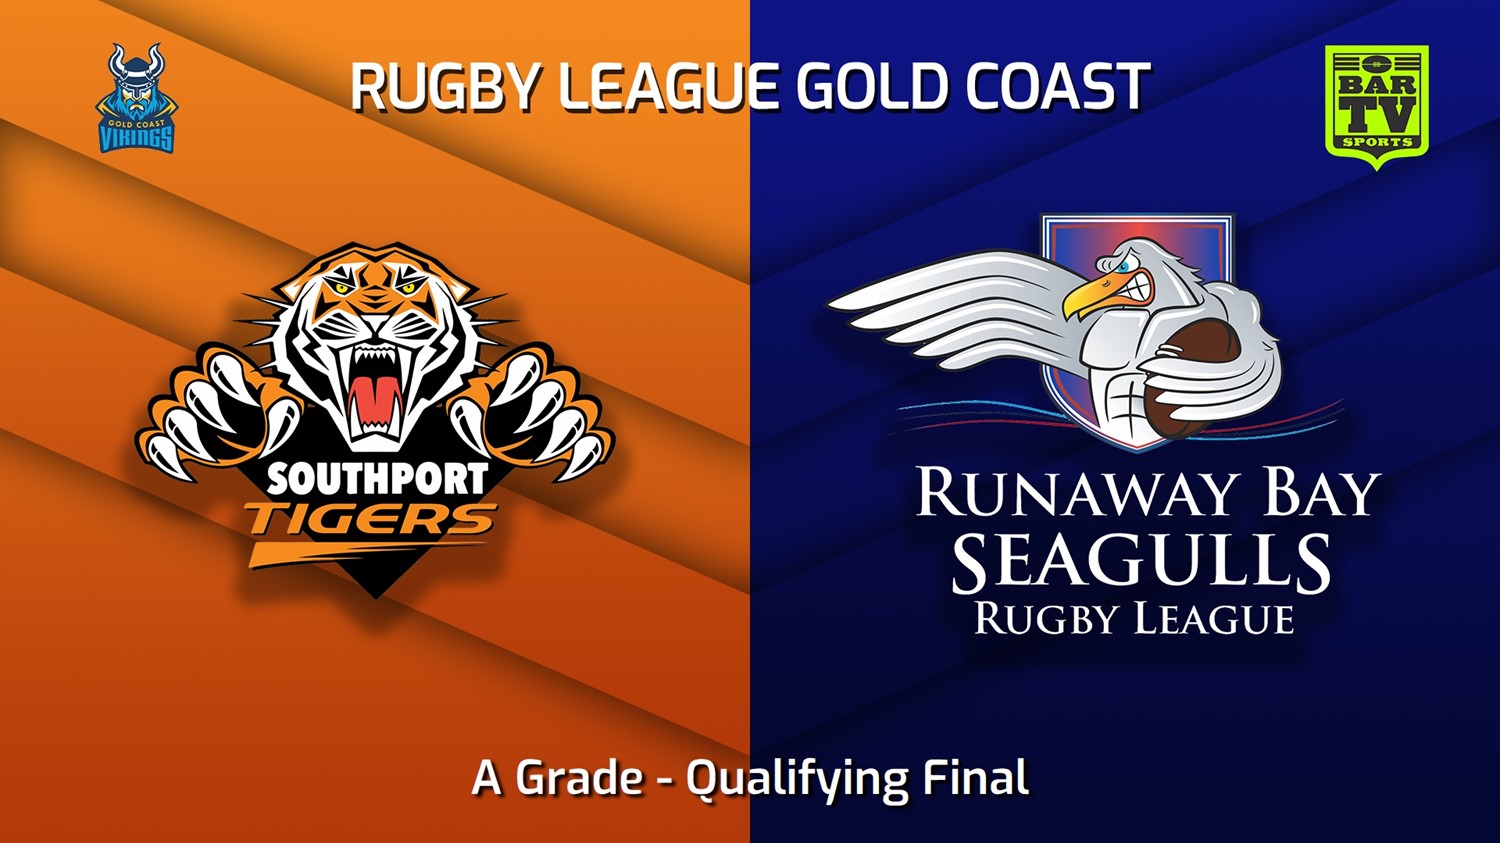 220828-Gold Coast Qualifying Final - A Grade - Southport Tigers v Runaway Bay Seagulls Minigame Slate Image